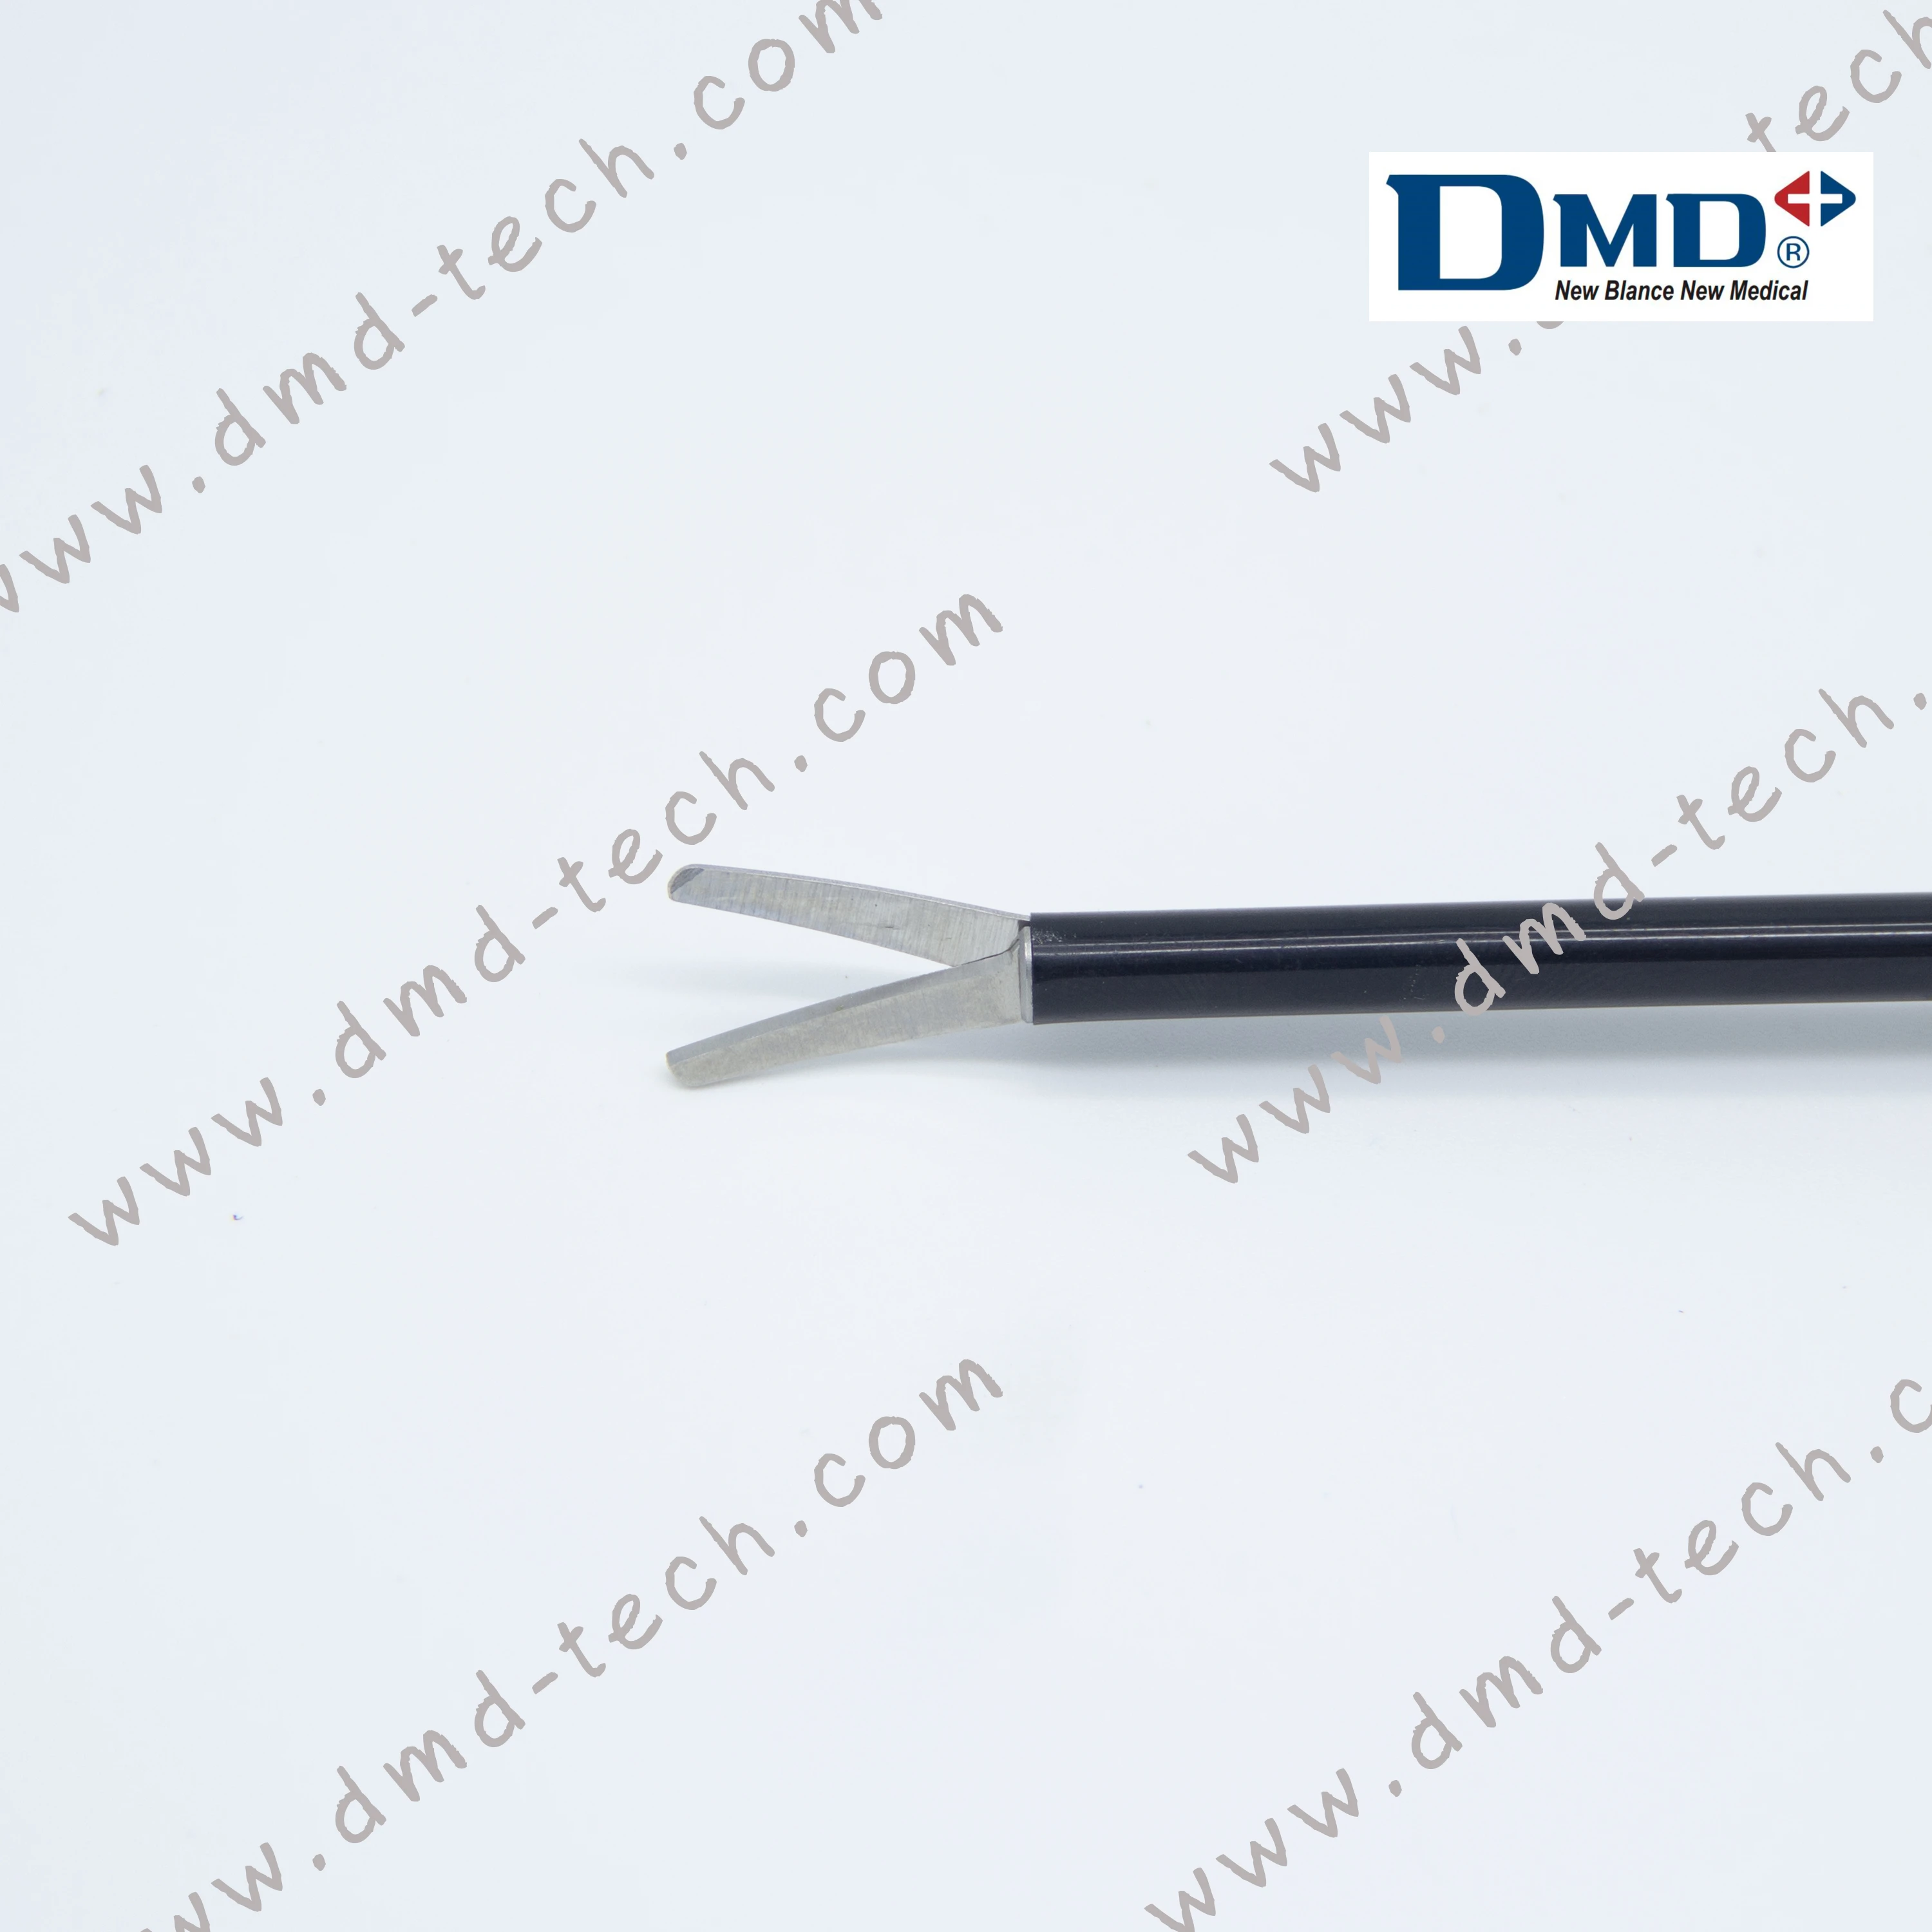 Endoscopic Surgical Instrument